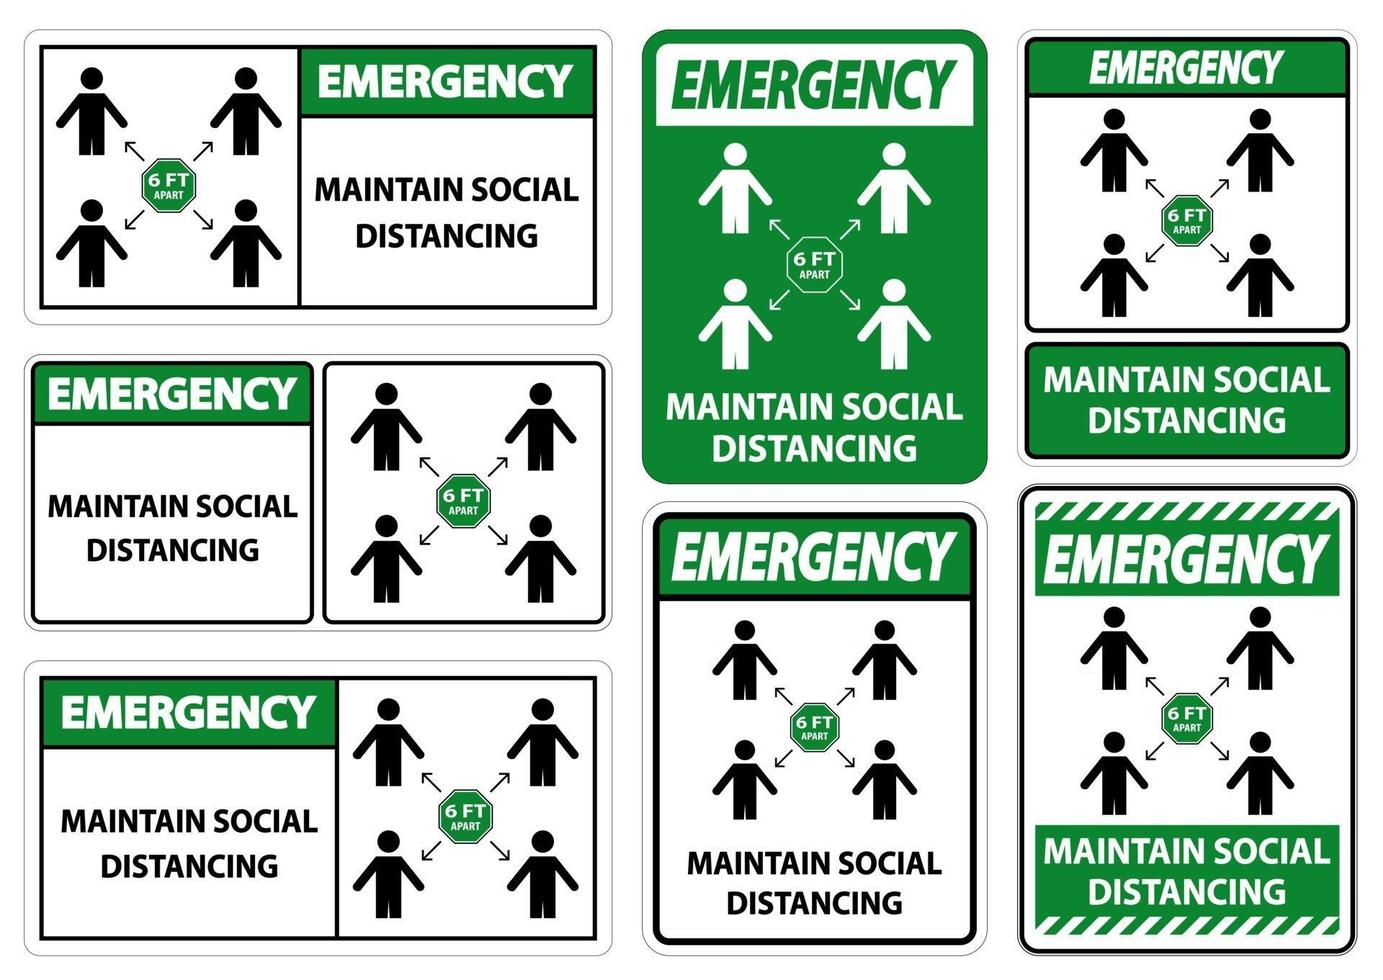 Emergency Maintain social distancing, stay 6ft apart sign,coronavirus COVID-19 Sign Isolate On White Background vector